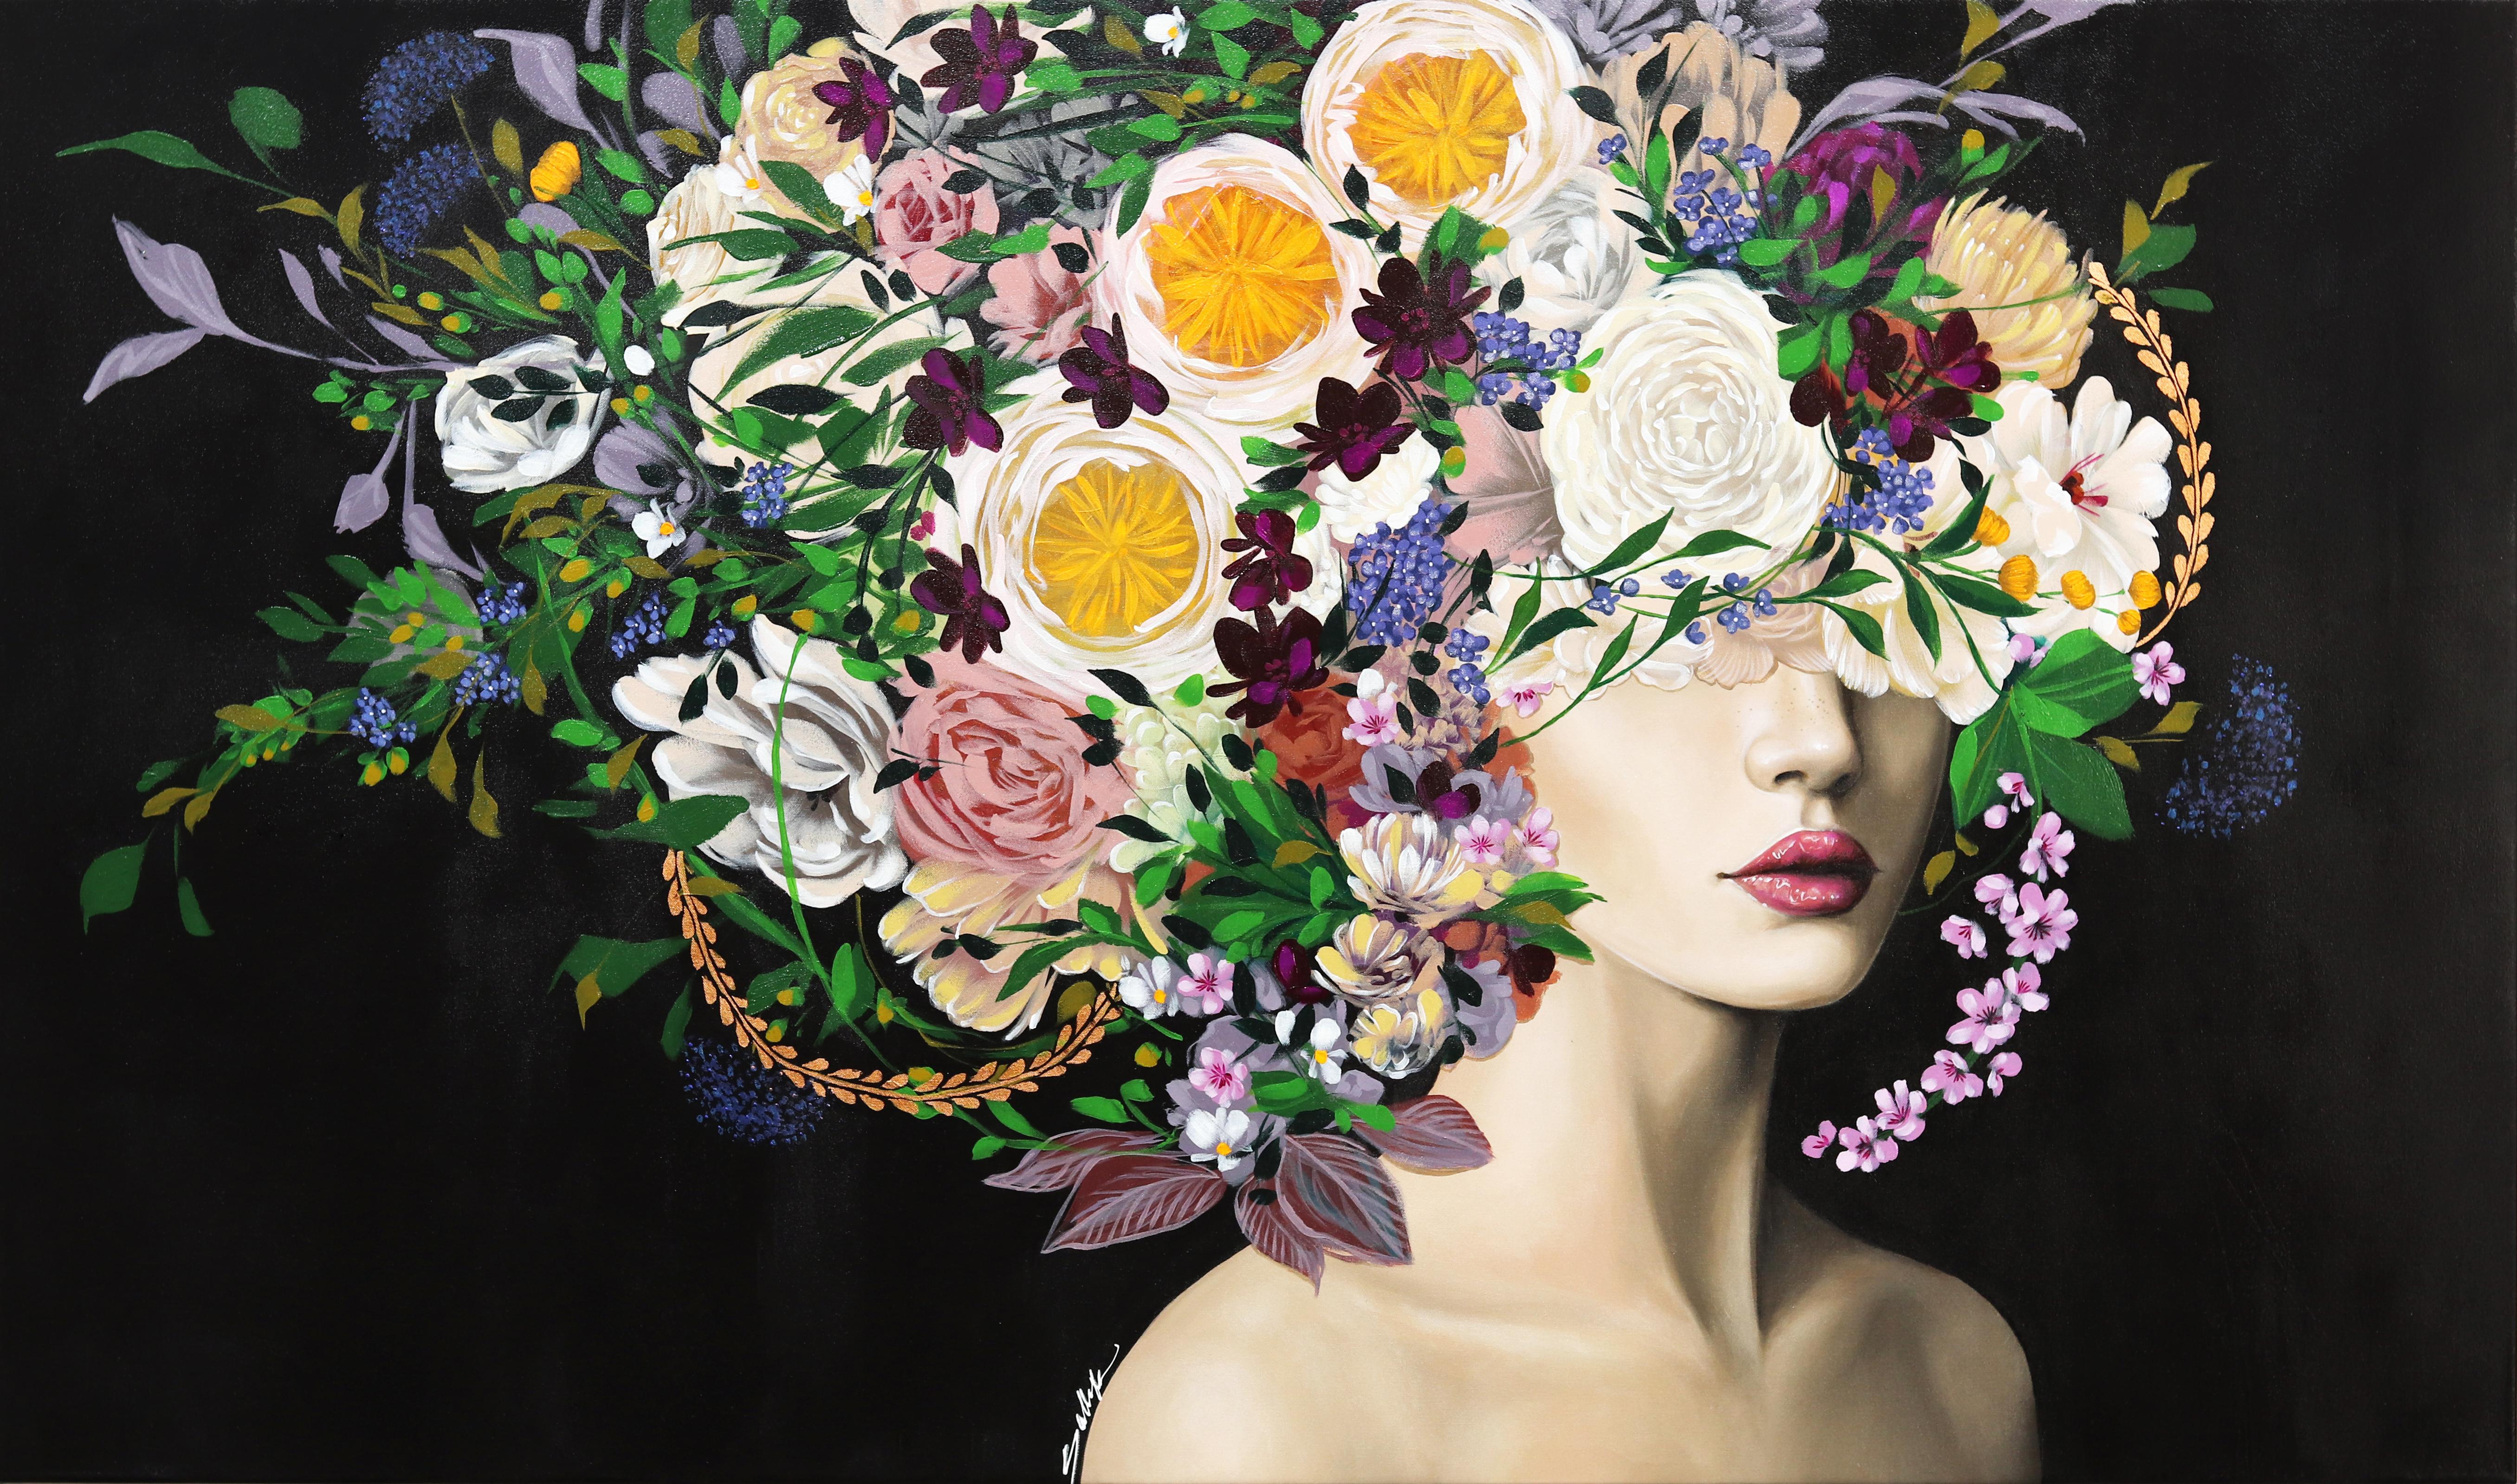 Sally K Figurative Painting - Blooming Night - Original Floral Figurative Portrait Painting  